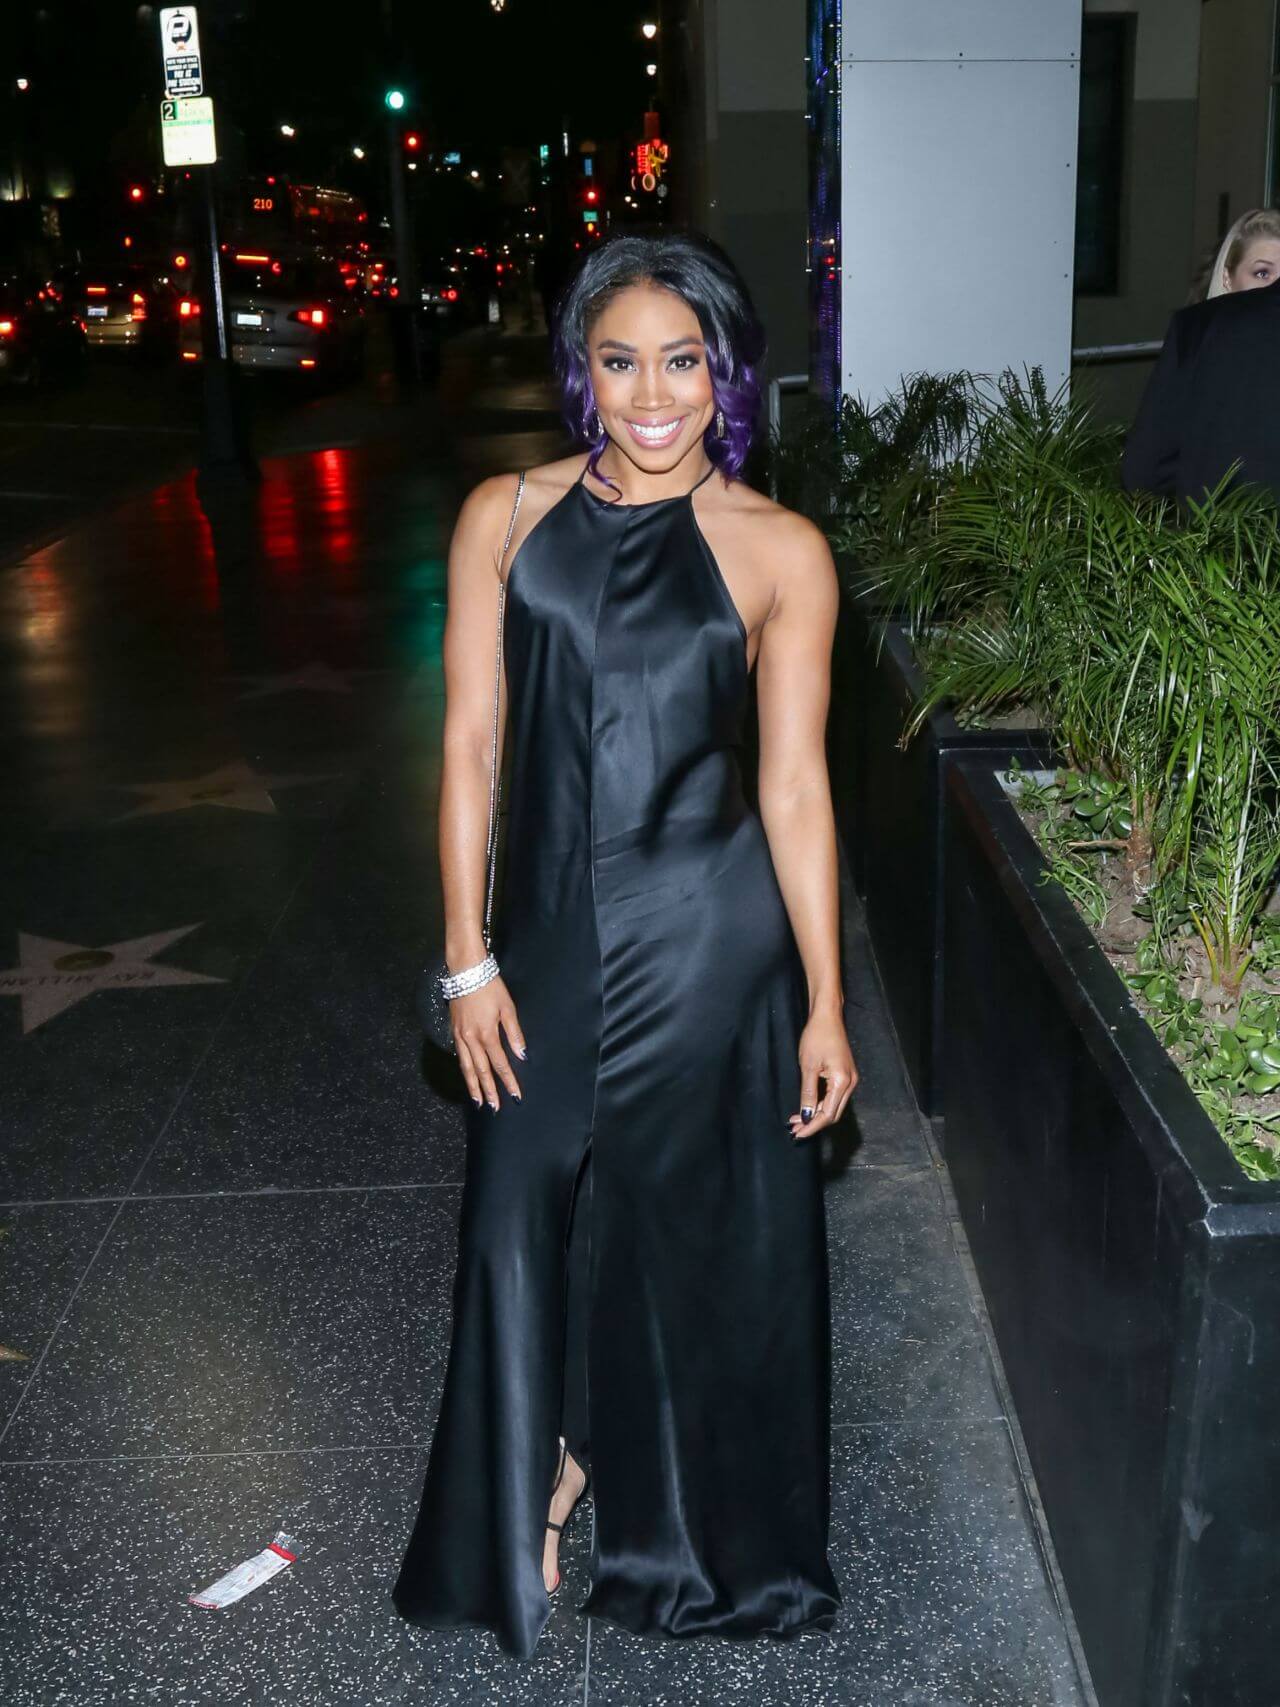 Ariane Andrew In Shiny Black Halter Neck Long Maxi Dress At the House of Macau in Los Angeles